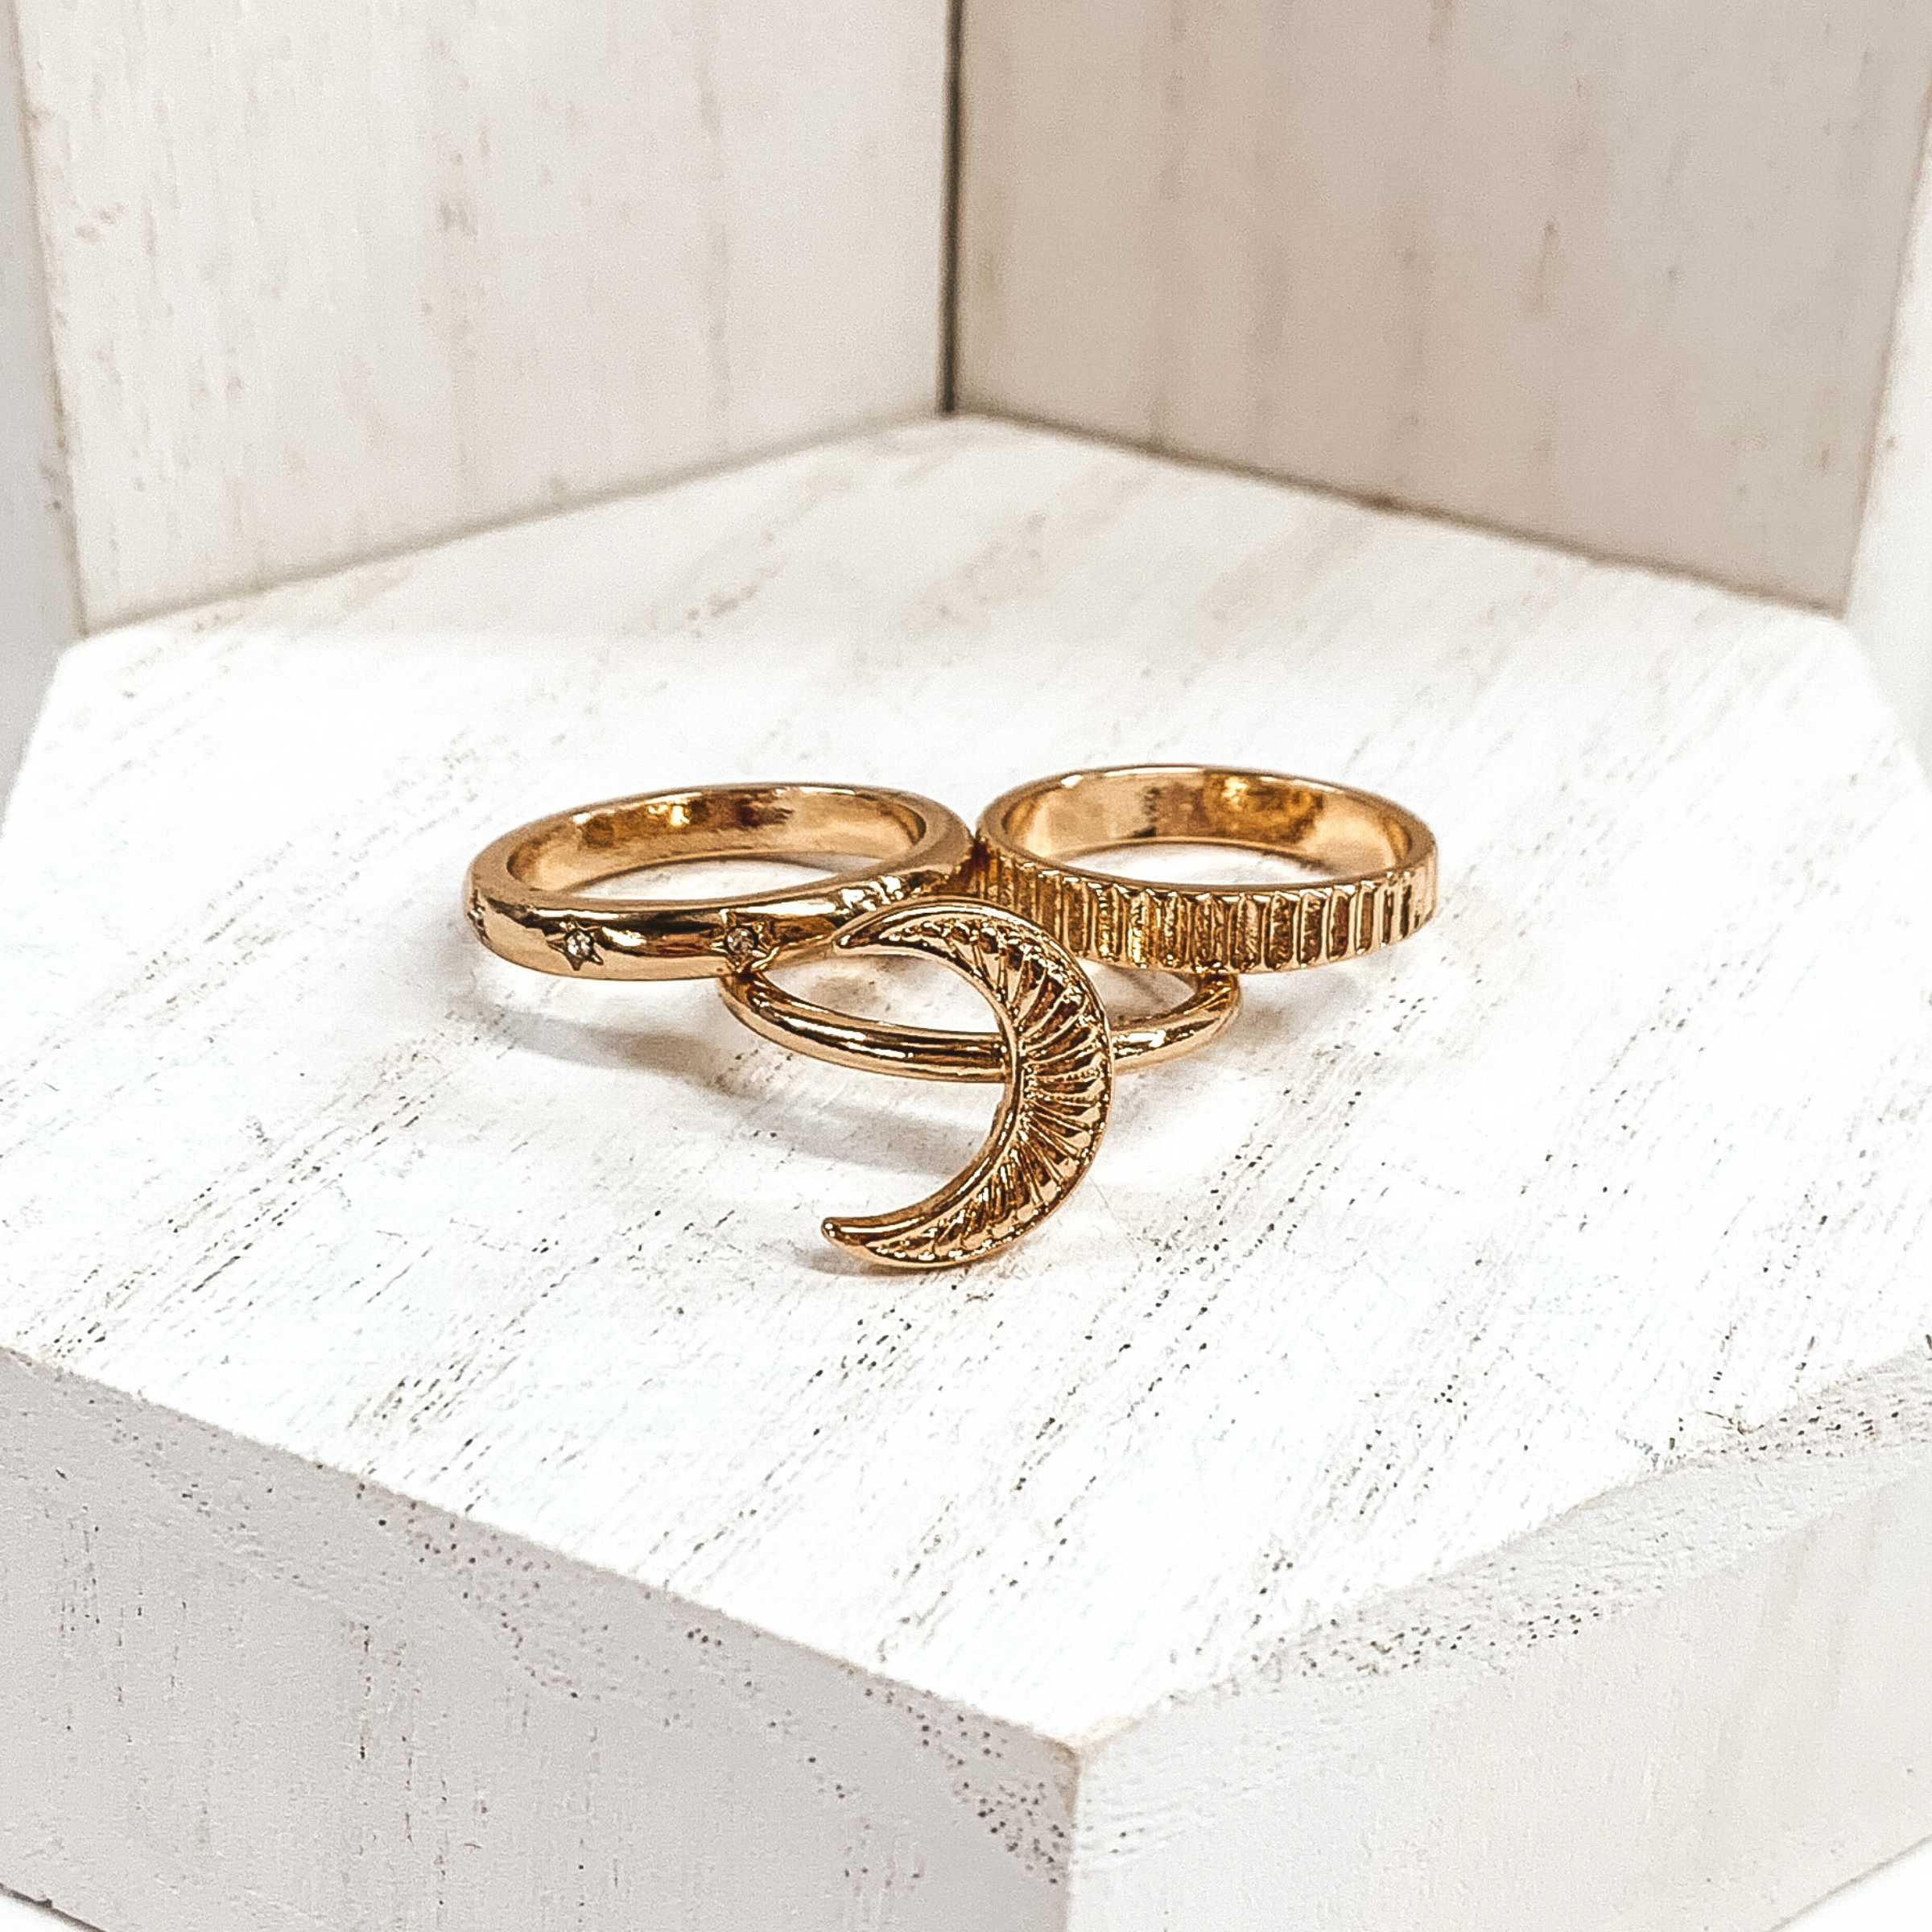 Set of three gold rings. One has a moon pendant, one is an indented striped ring, and the last on has tiny engraved star with tiny clear crystals in the middle. These rings are pictured on a white background.